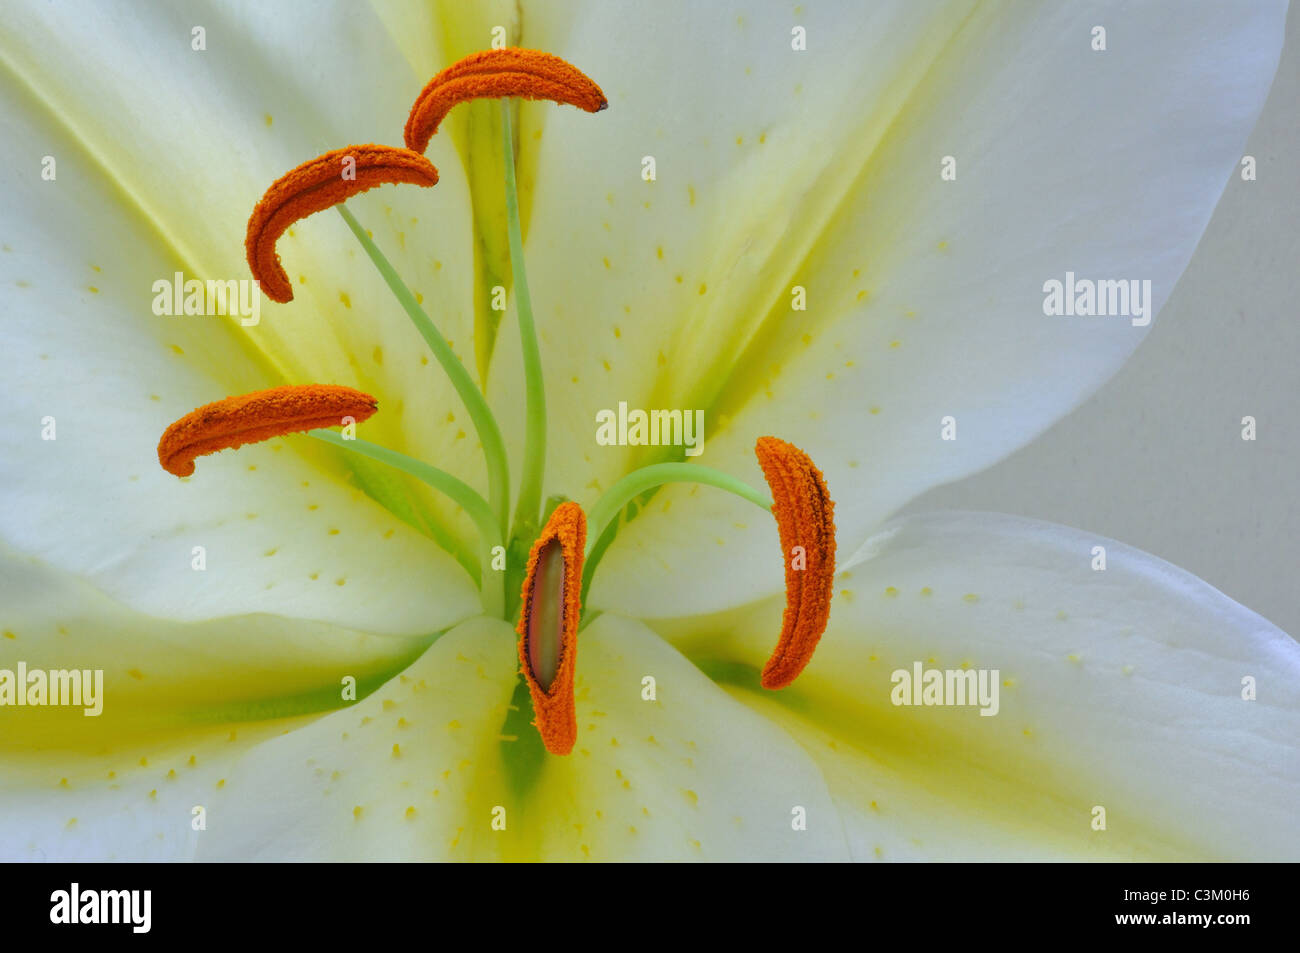 White lily, showing five Stamens and Filaments Stock Photo